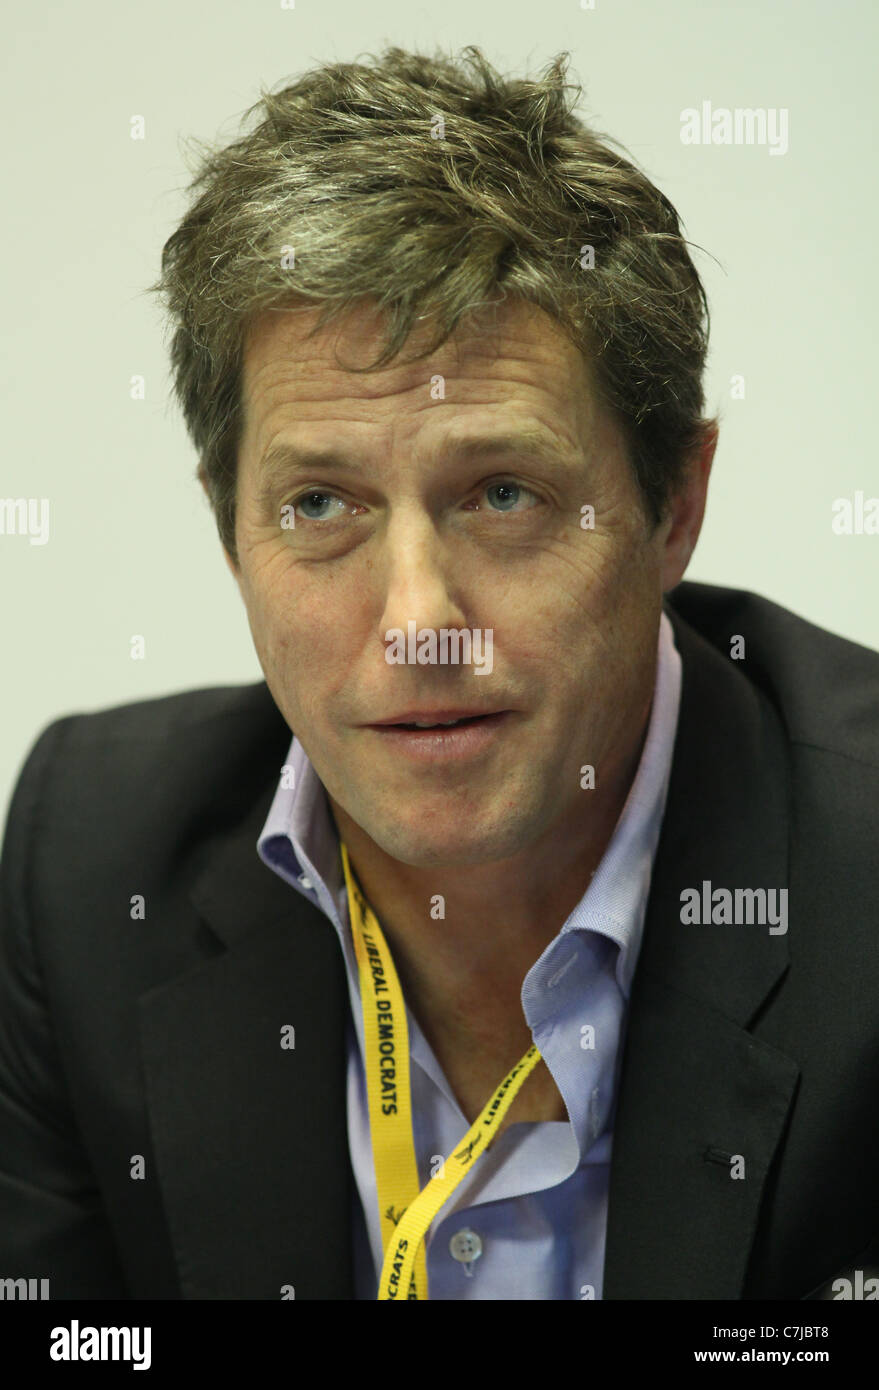 HUGH GRANT HACKED OFF CAMPAIGN LIBERAL C 18 September 2011 THE ICC BIRMINGHAM ENGLAND Stock Photo